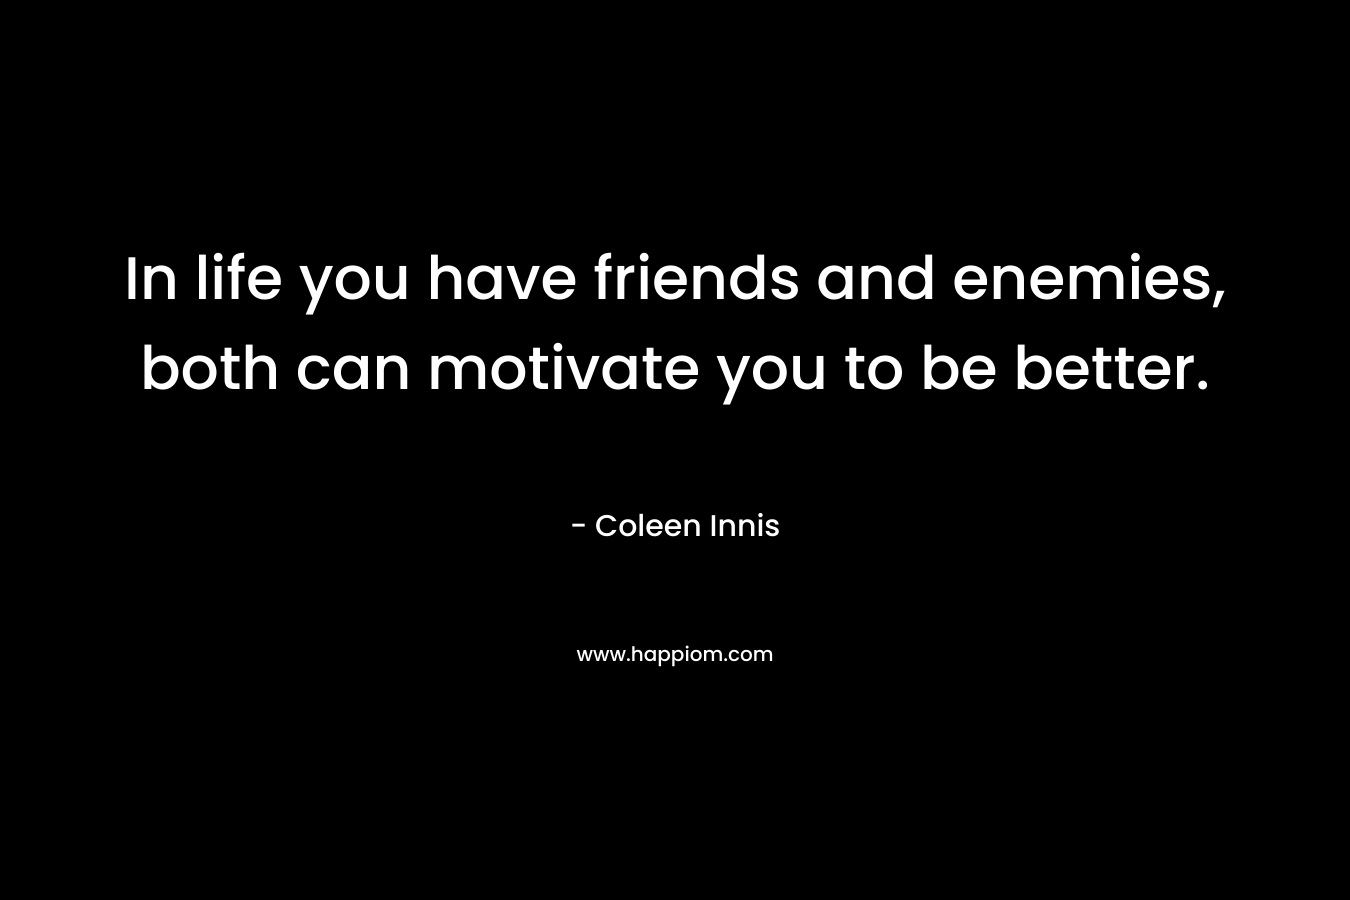 In life you have friends and enemies, both can motivate you to be better.